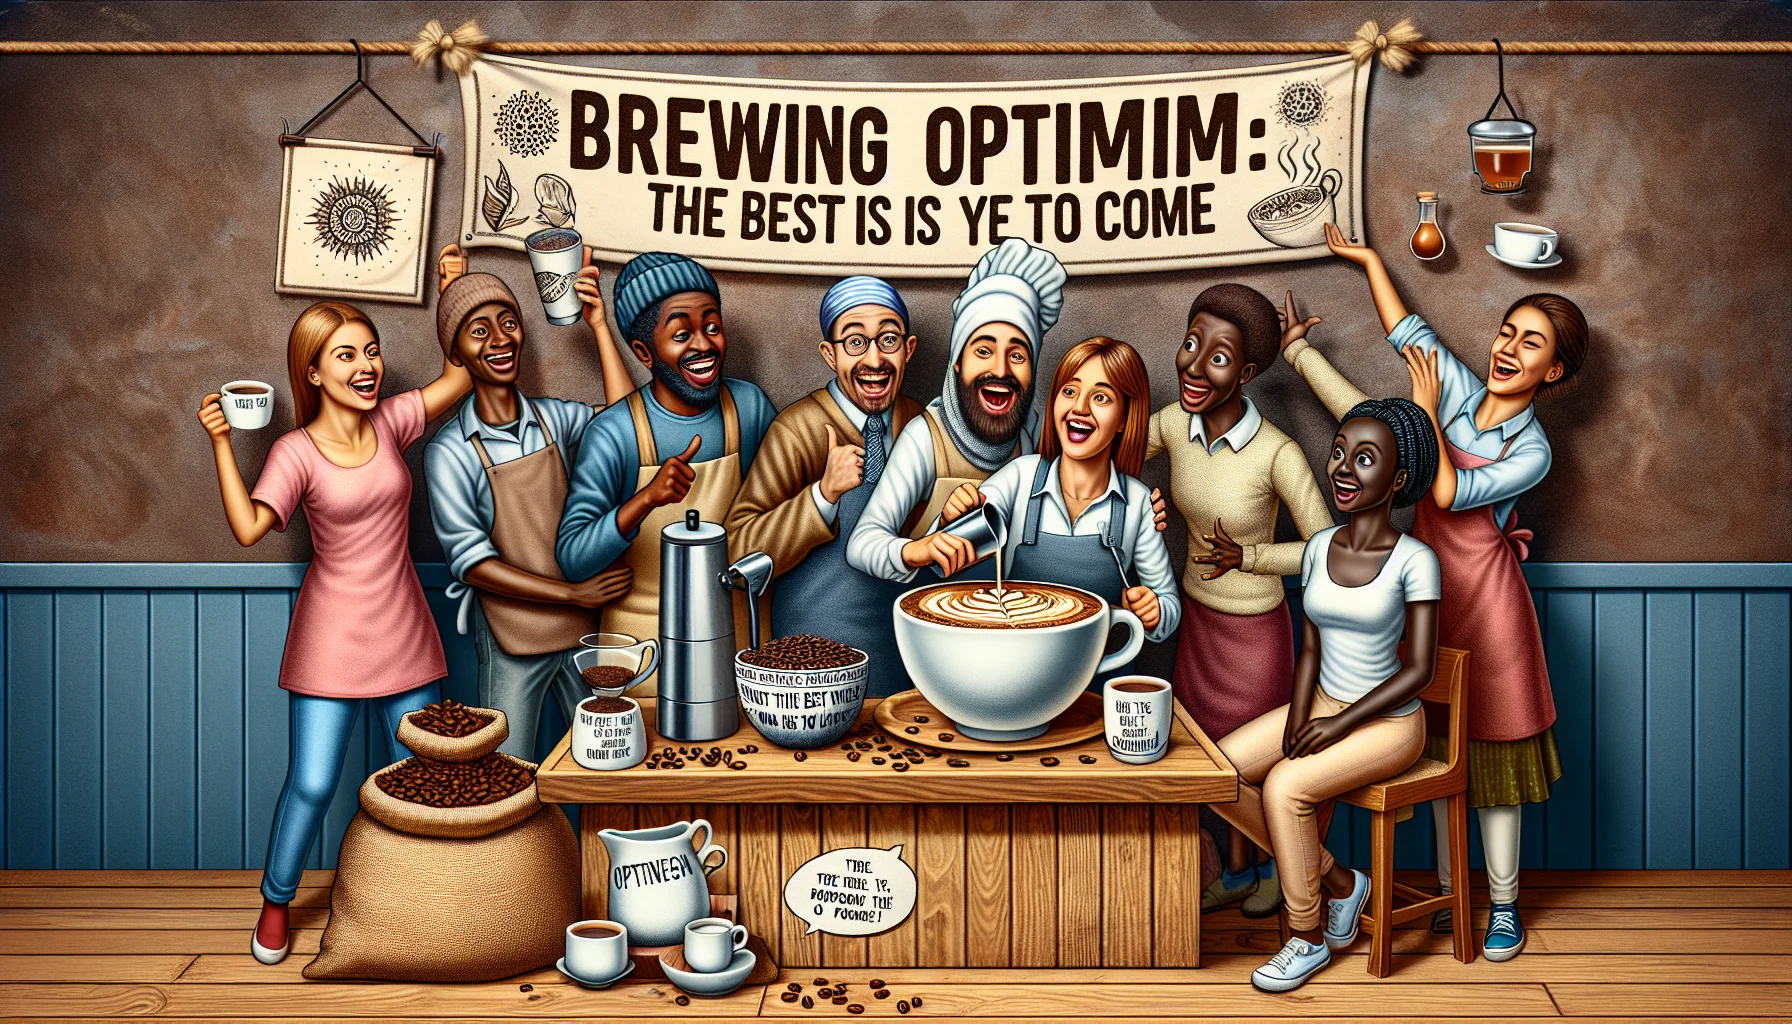 Picture a humorous scenario encompassing the message 'Brewing Optimism: The Best Is Yet To Come'. It's a small, cozy café with a diverse group of customers. A Middle-Eastern female barista is creating an intricate latte art depicting 'The Best Is Yet To Come'. Next to her, an African male barista is brewing an exotic tea with a playful grin. The diverse customers representing various descents and genders enthusiastically wait, each with their own unique coffee mugs featuring funny quotes about optimism. Coffee bean sacks and a tea leaf basket embossed with 'Brewing Optimism' are seen in the backdrop.